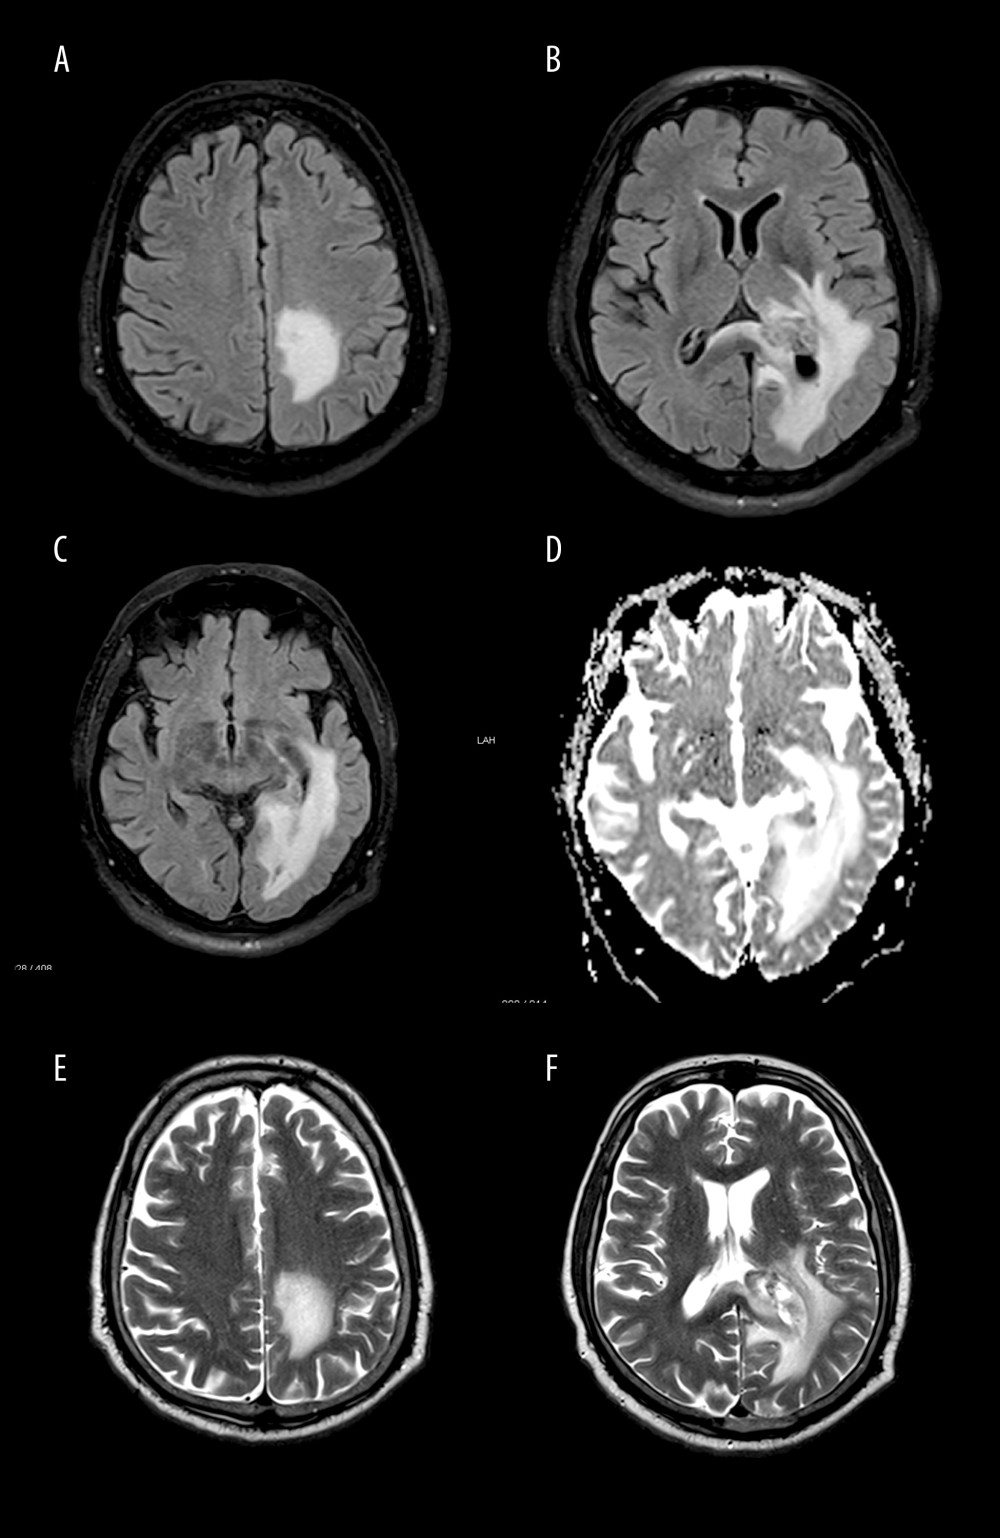 Multiple axial views of the magnetic resonance imaging (MRI) showing left lateral ventricle lesion with mild diffuse dural enhancement, with multiple series. (A–C) Represent series of T2 TIRM (turbo inversion recovery magnitude) dark fluid. (D) Represents series of DWI (diffusion weighted imaging). (E, F) Represent series of T2 TSE (turbo spin-echo).